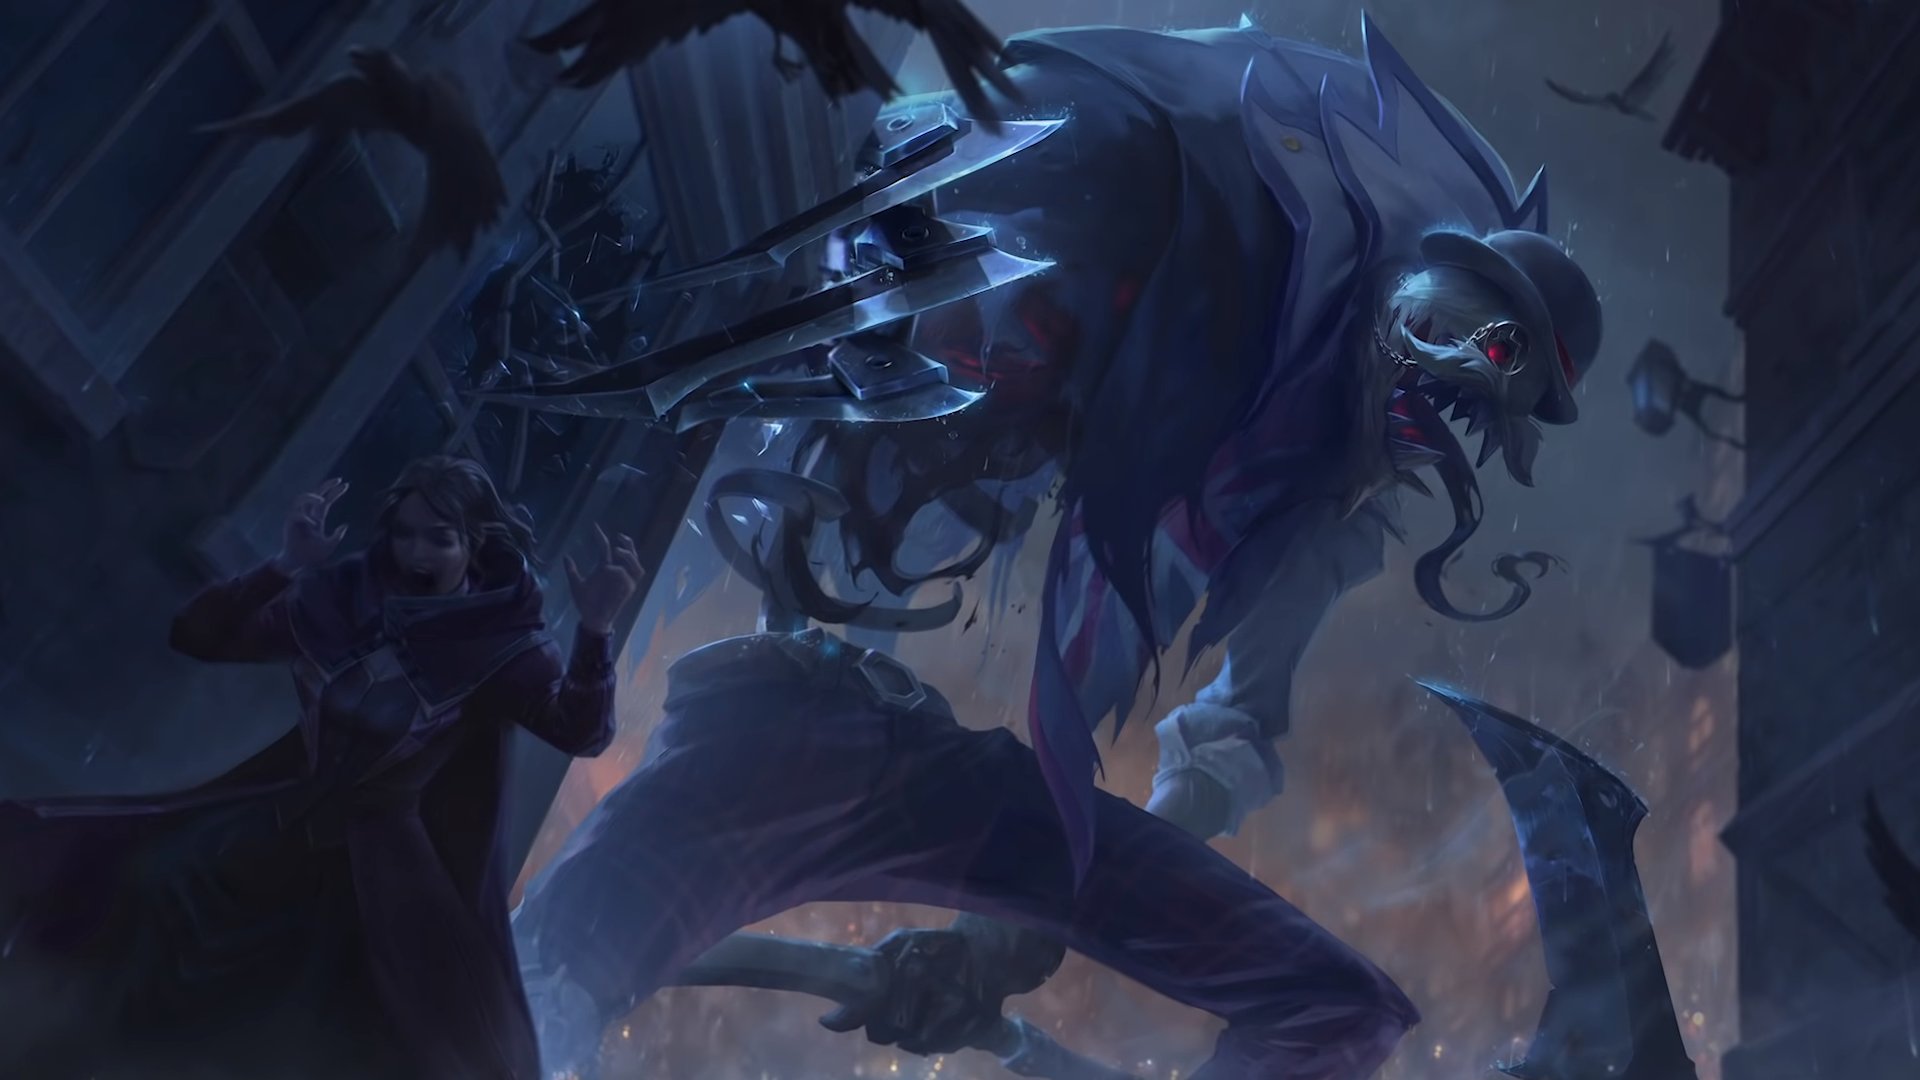 Here's each of Fiddlesticks splash arts as shown in the champion theme...